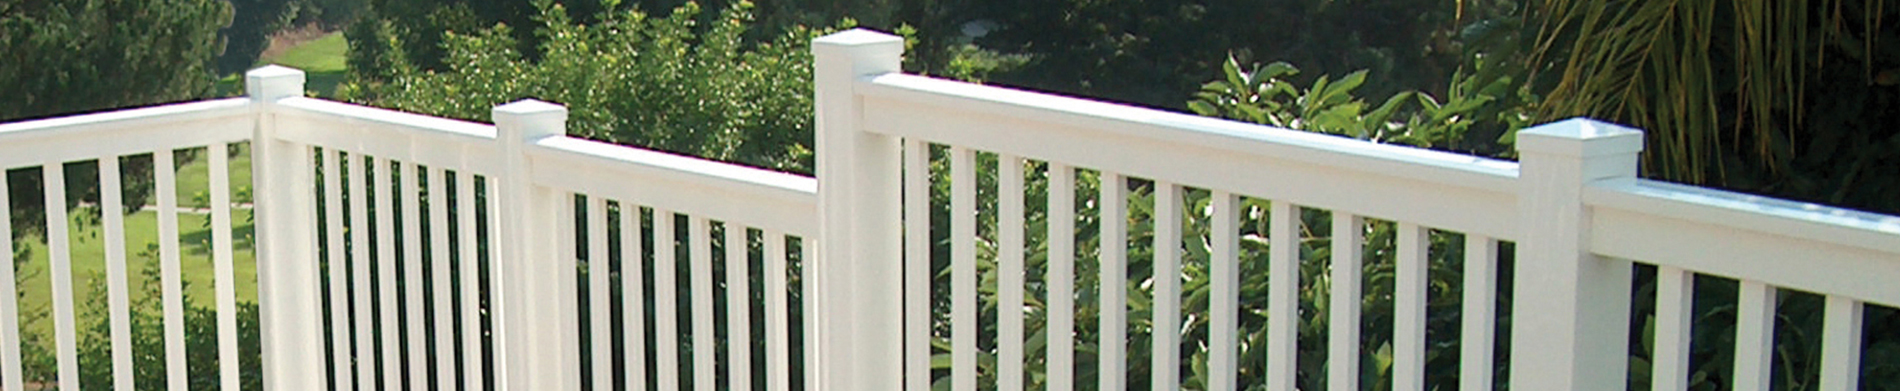 Install a vinyl fence to enhance the security of your property – Hire a local contractor for a vinyl fence installation